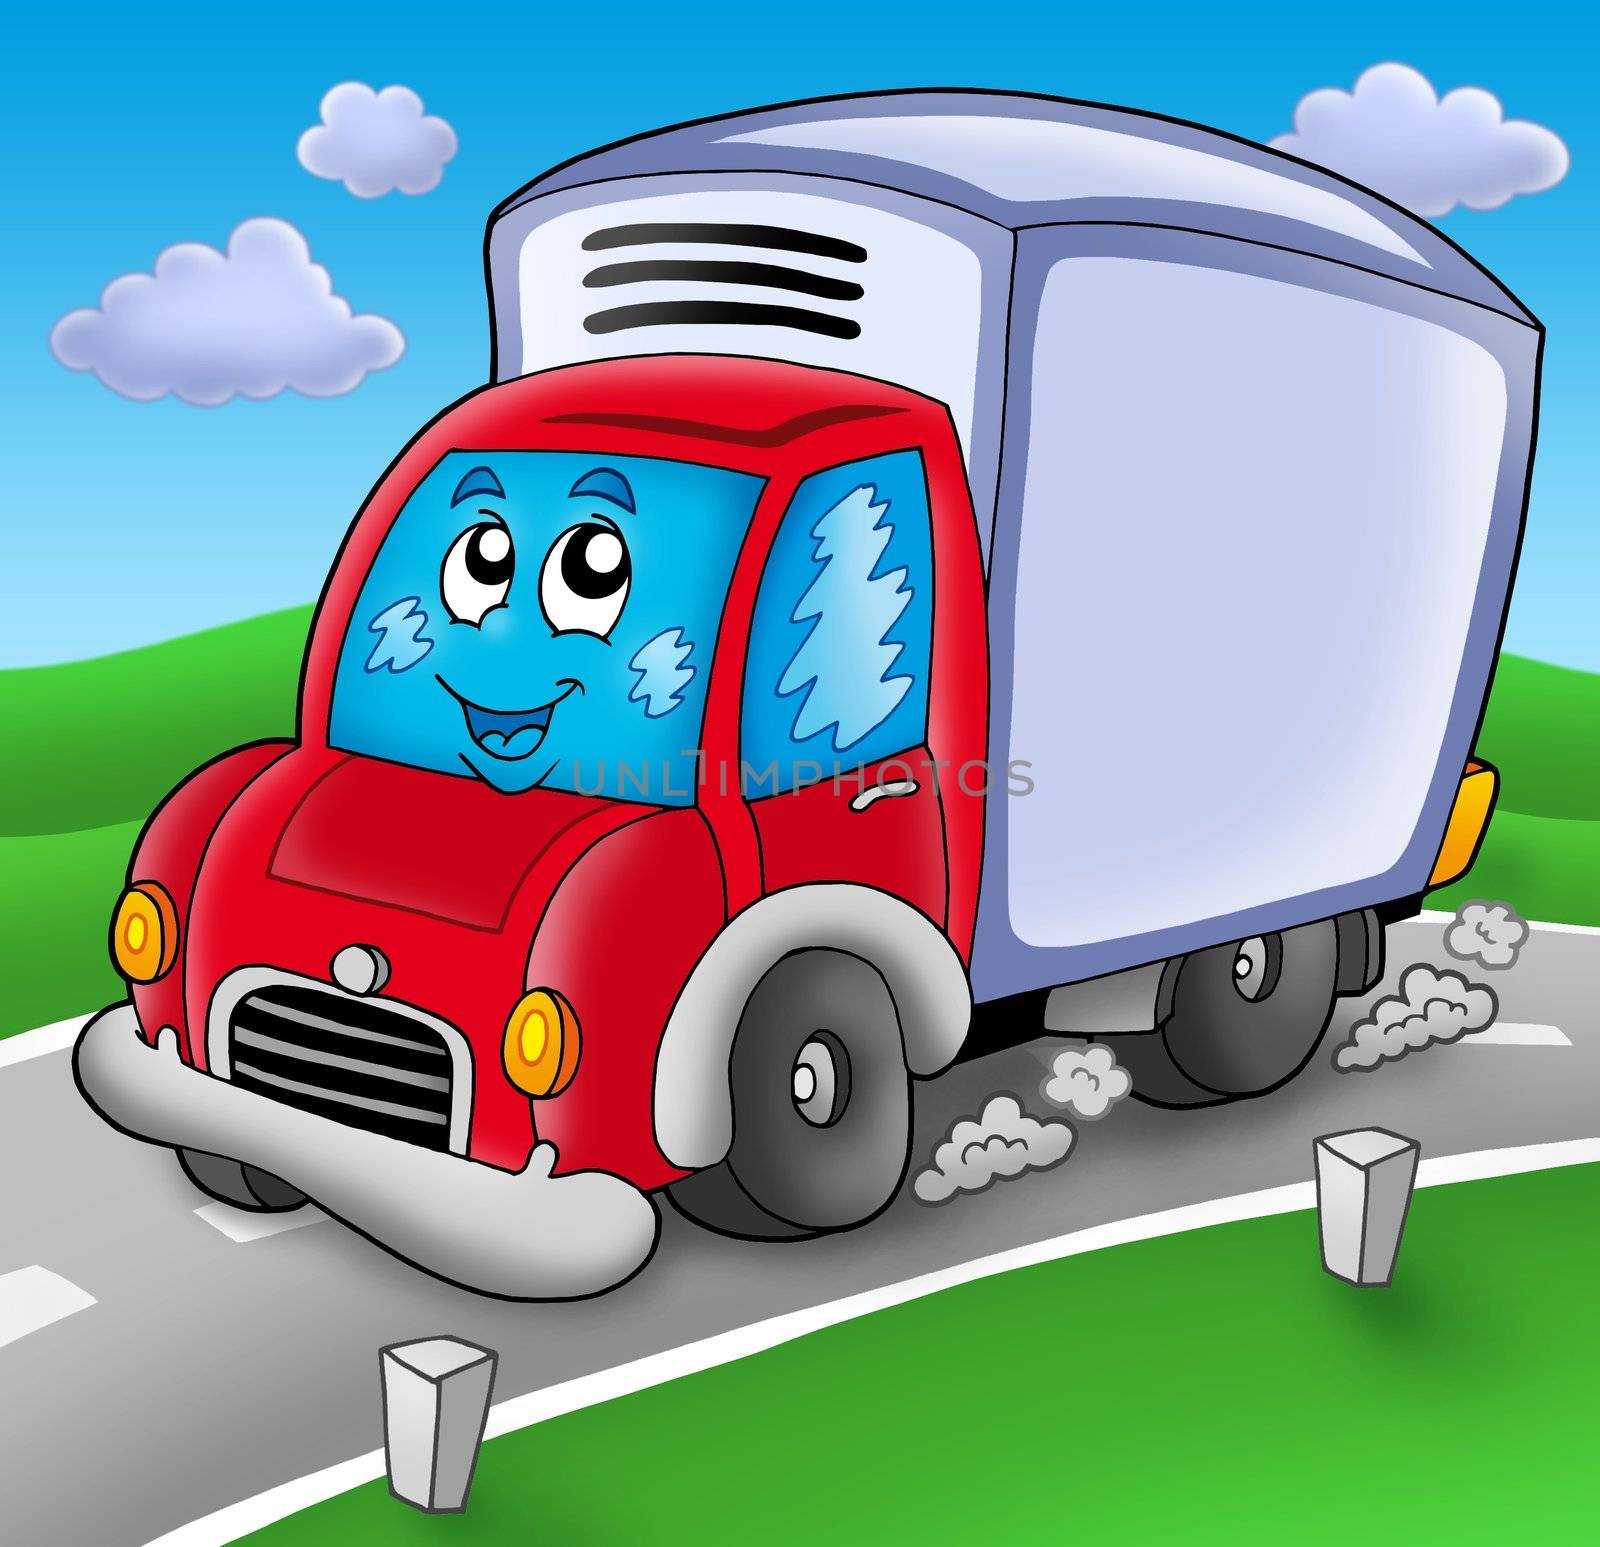 Cute delivery car on road - color illustration.